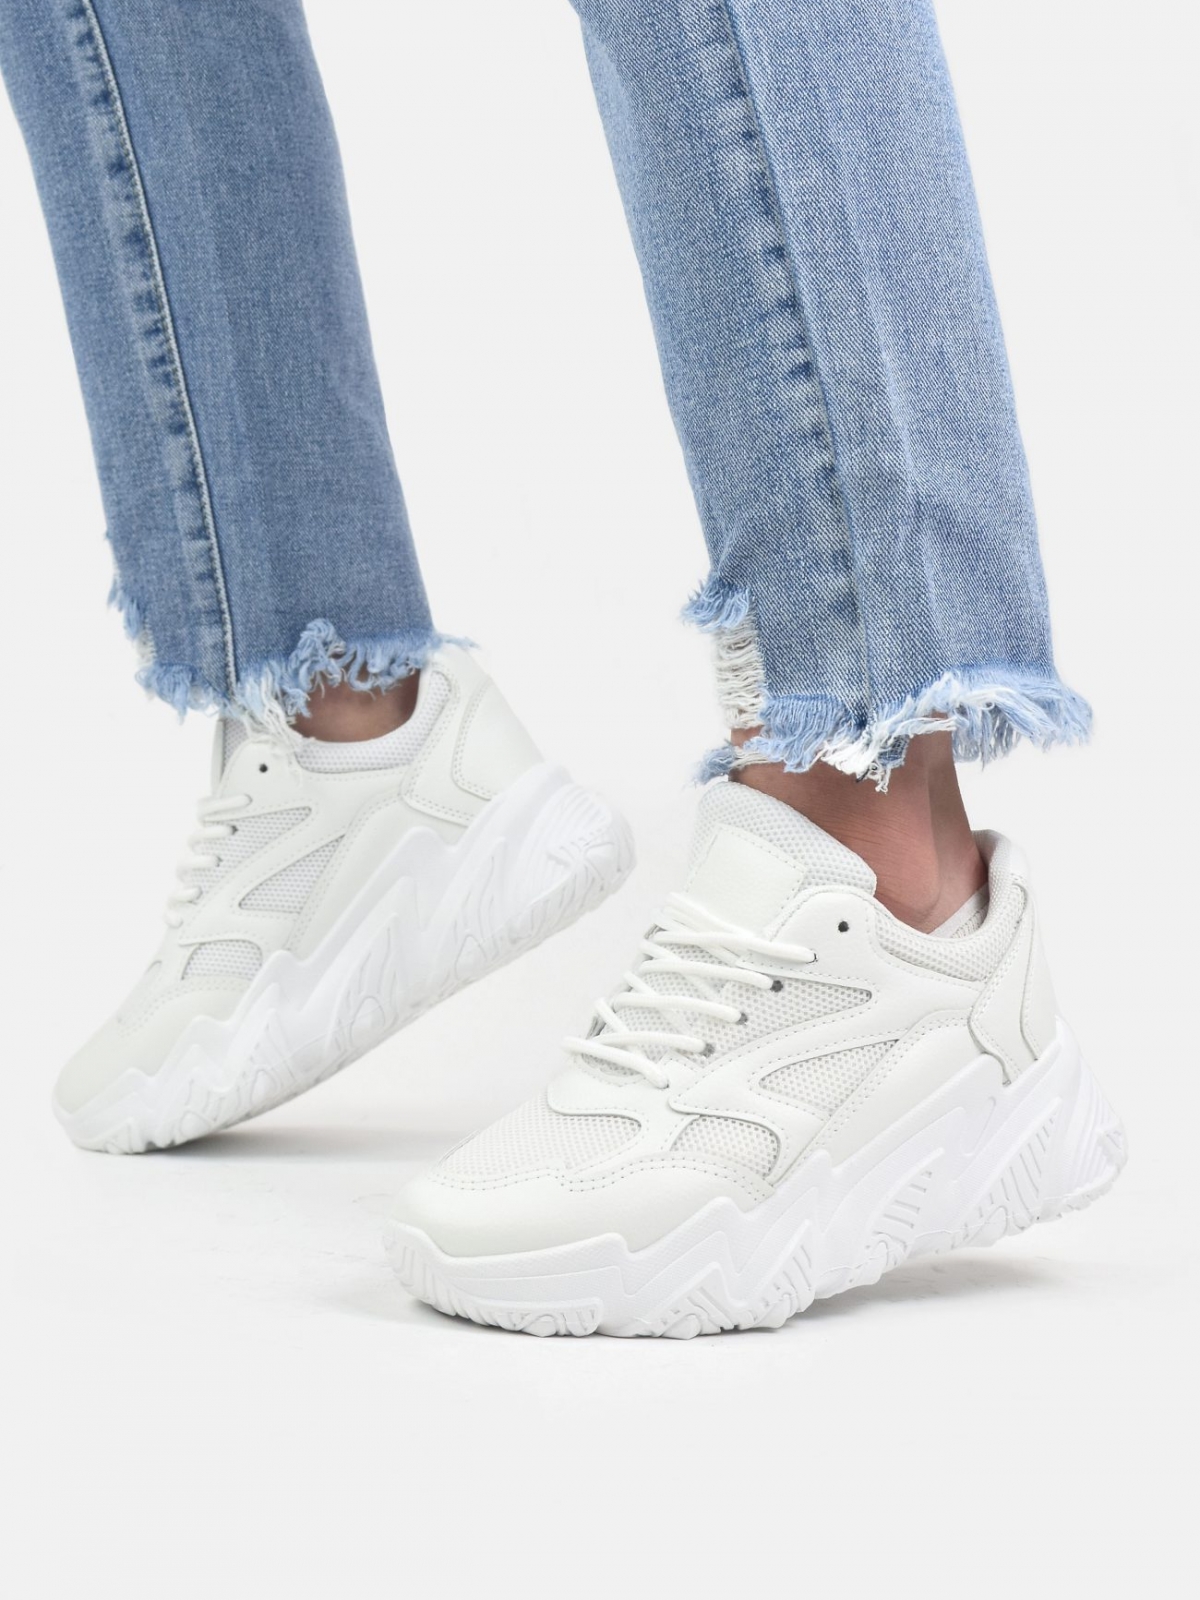 Modern style trainers with thick sole in white